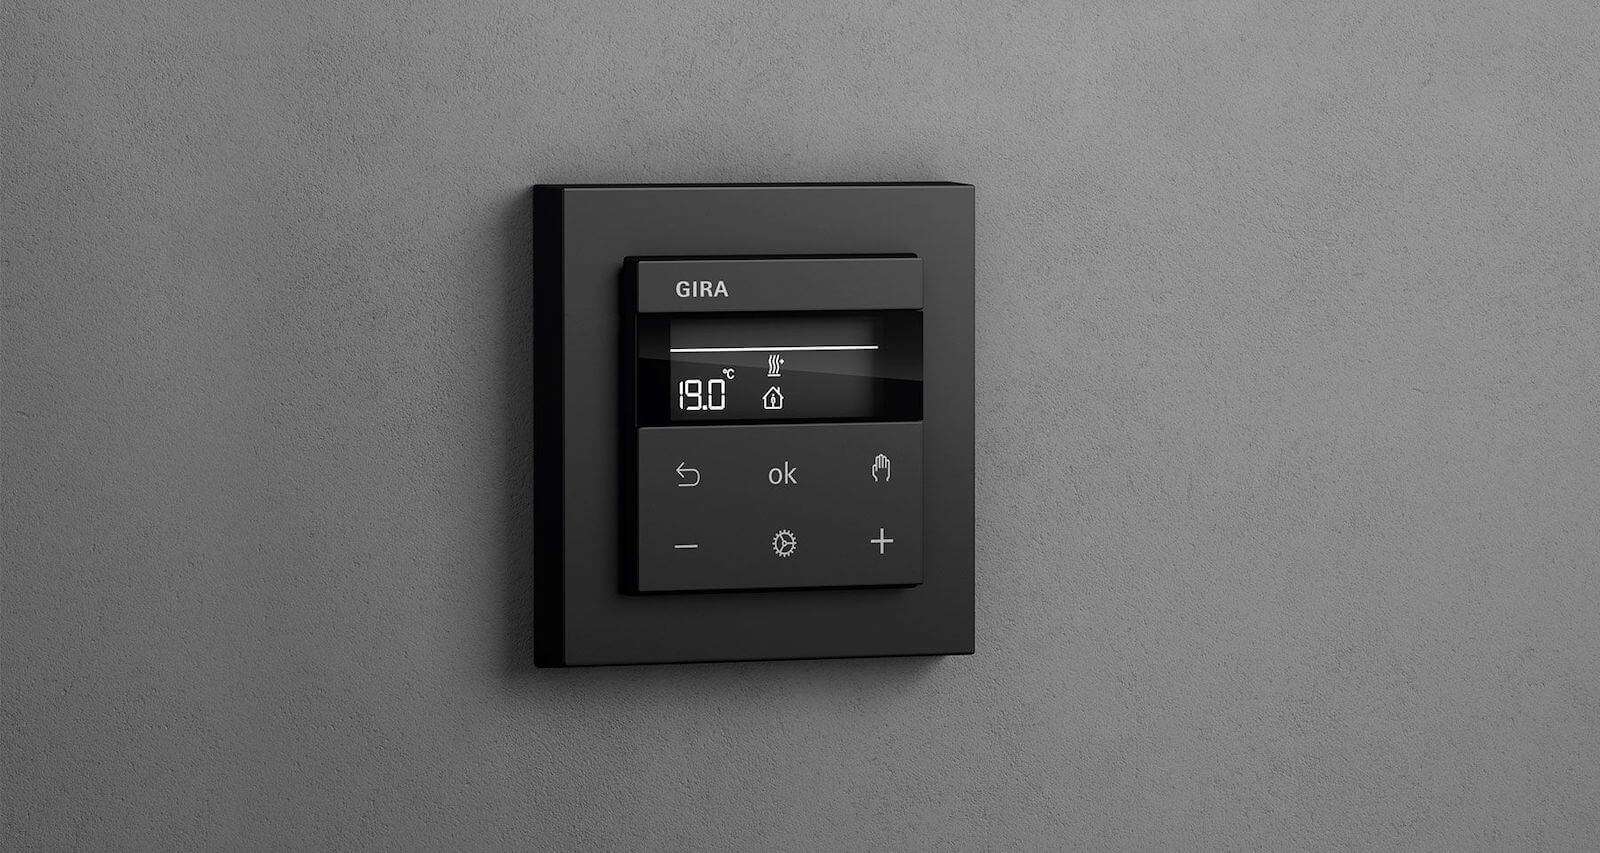 Enjoy the benefits of smart heating with the Gira System 3000 room temperature controller: manually or remotely via app.